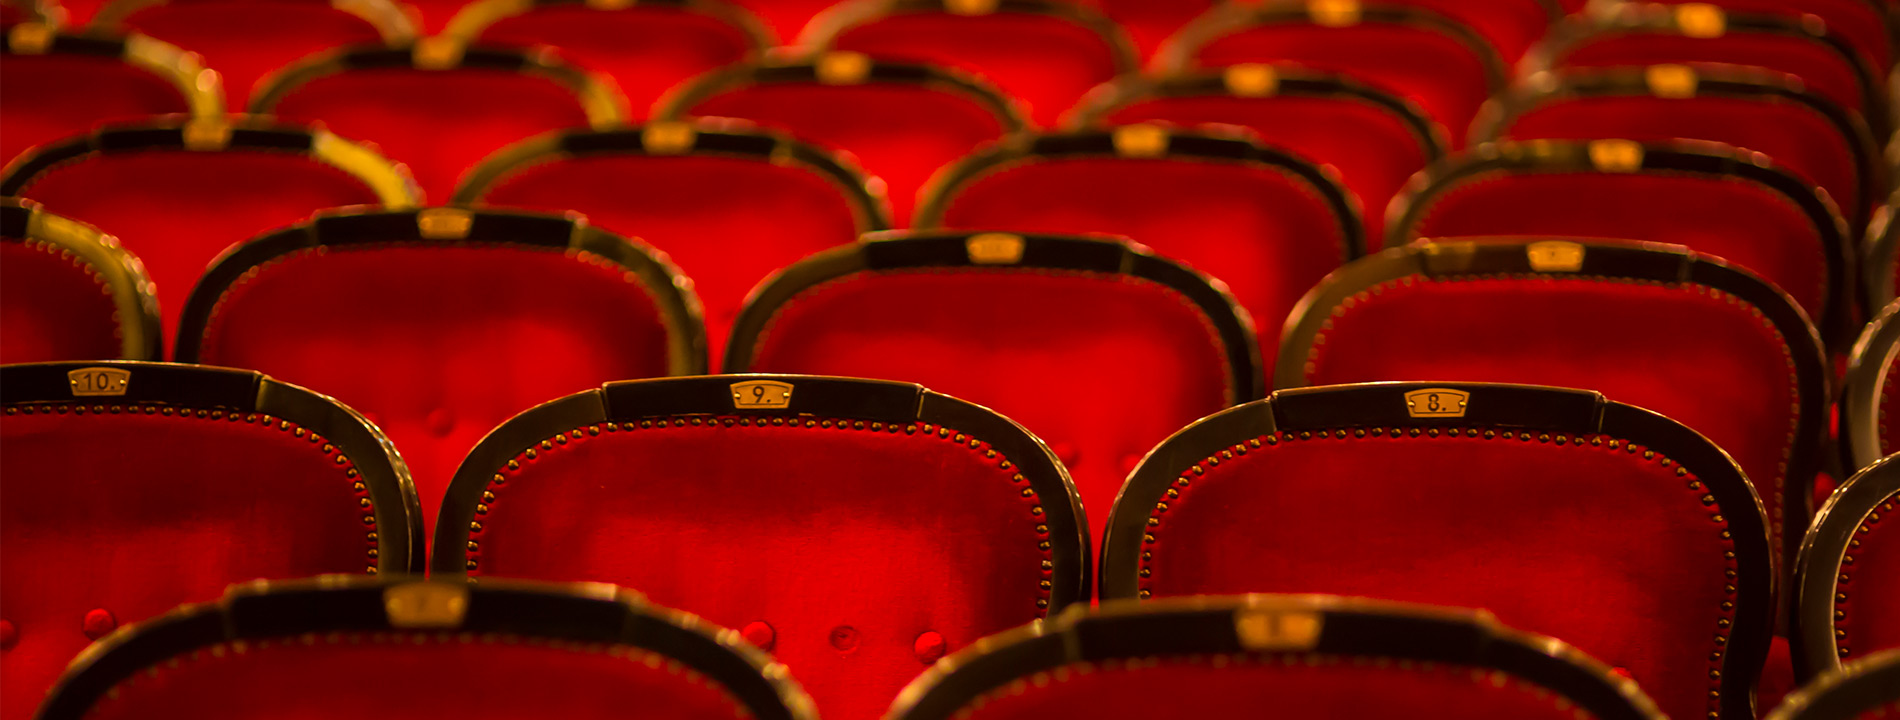 Red seats in a theater.